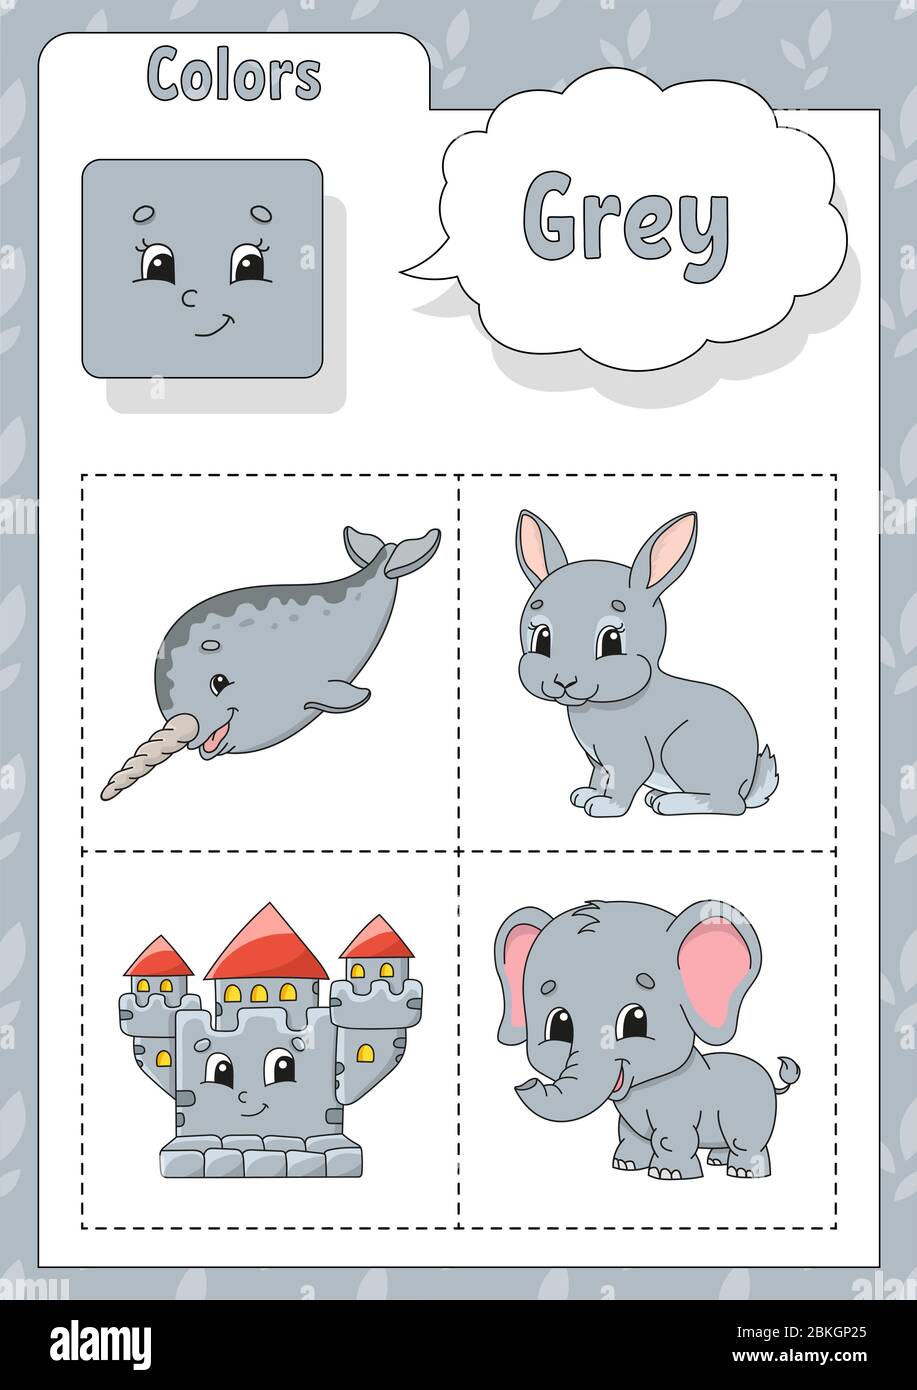 Learning colors. Grey color. Flashcard for kids. Cute cartoon characters. Picture set for preschoolers. Education worksheet. Vector illustration. Stock Vector